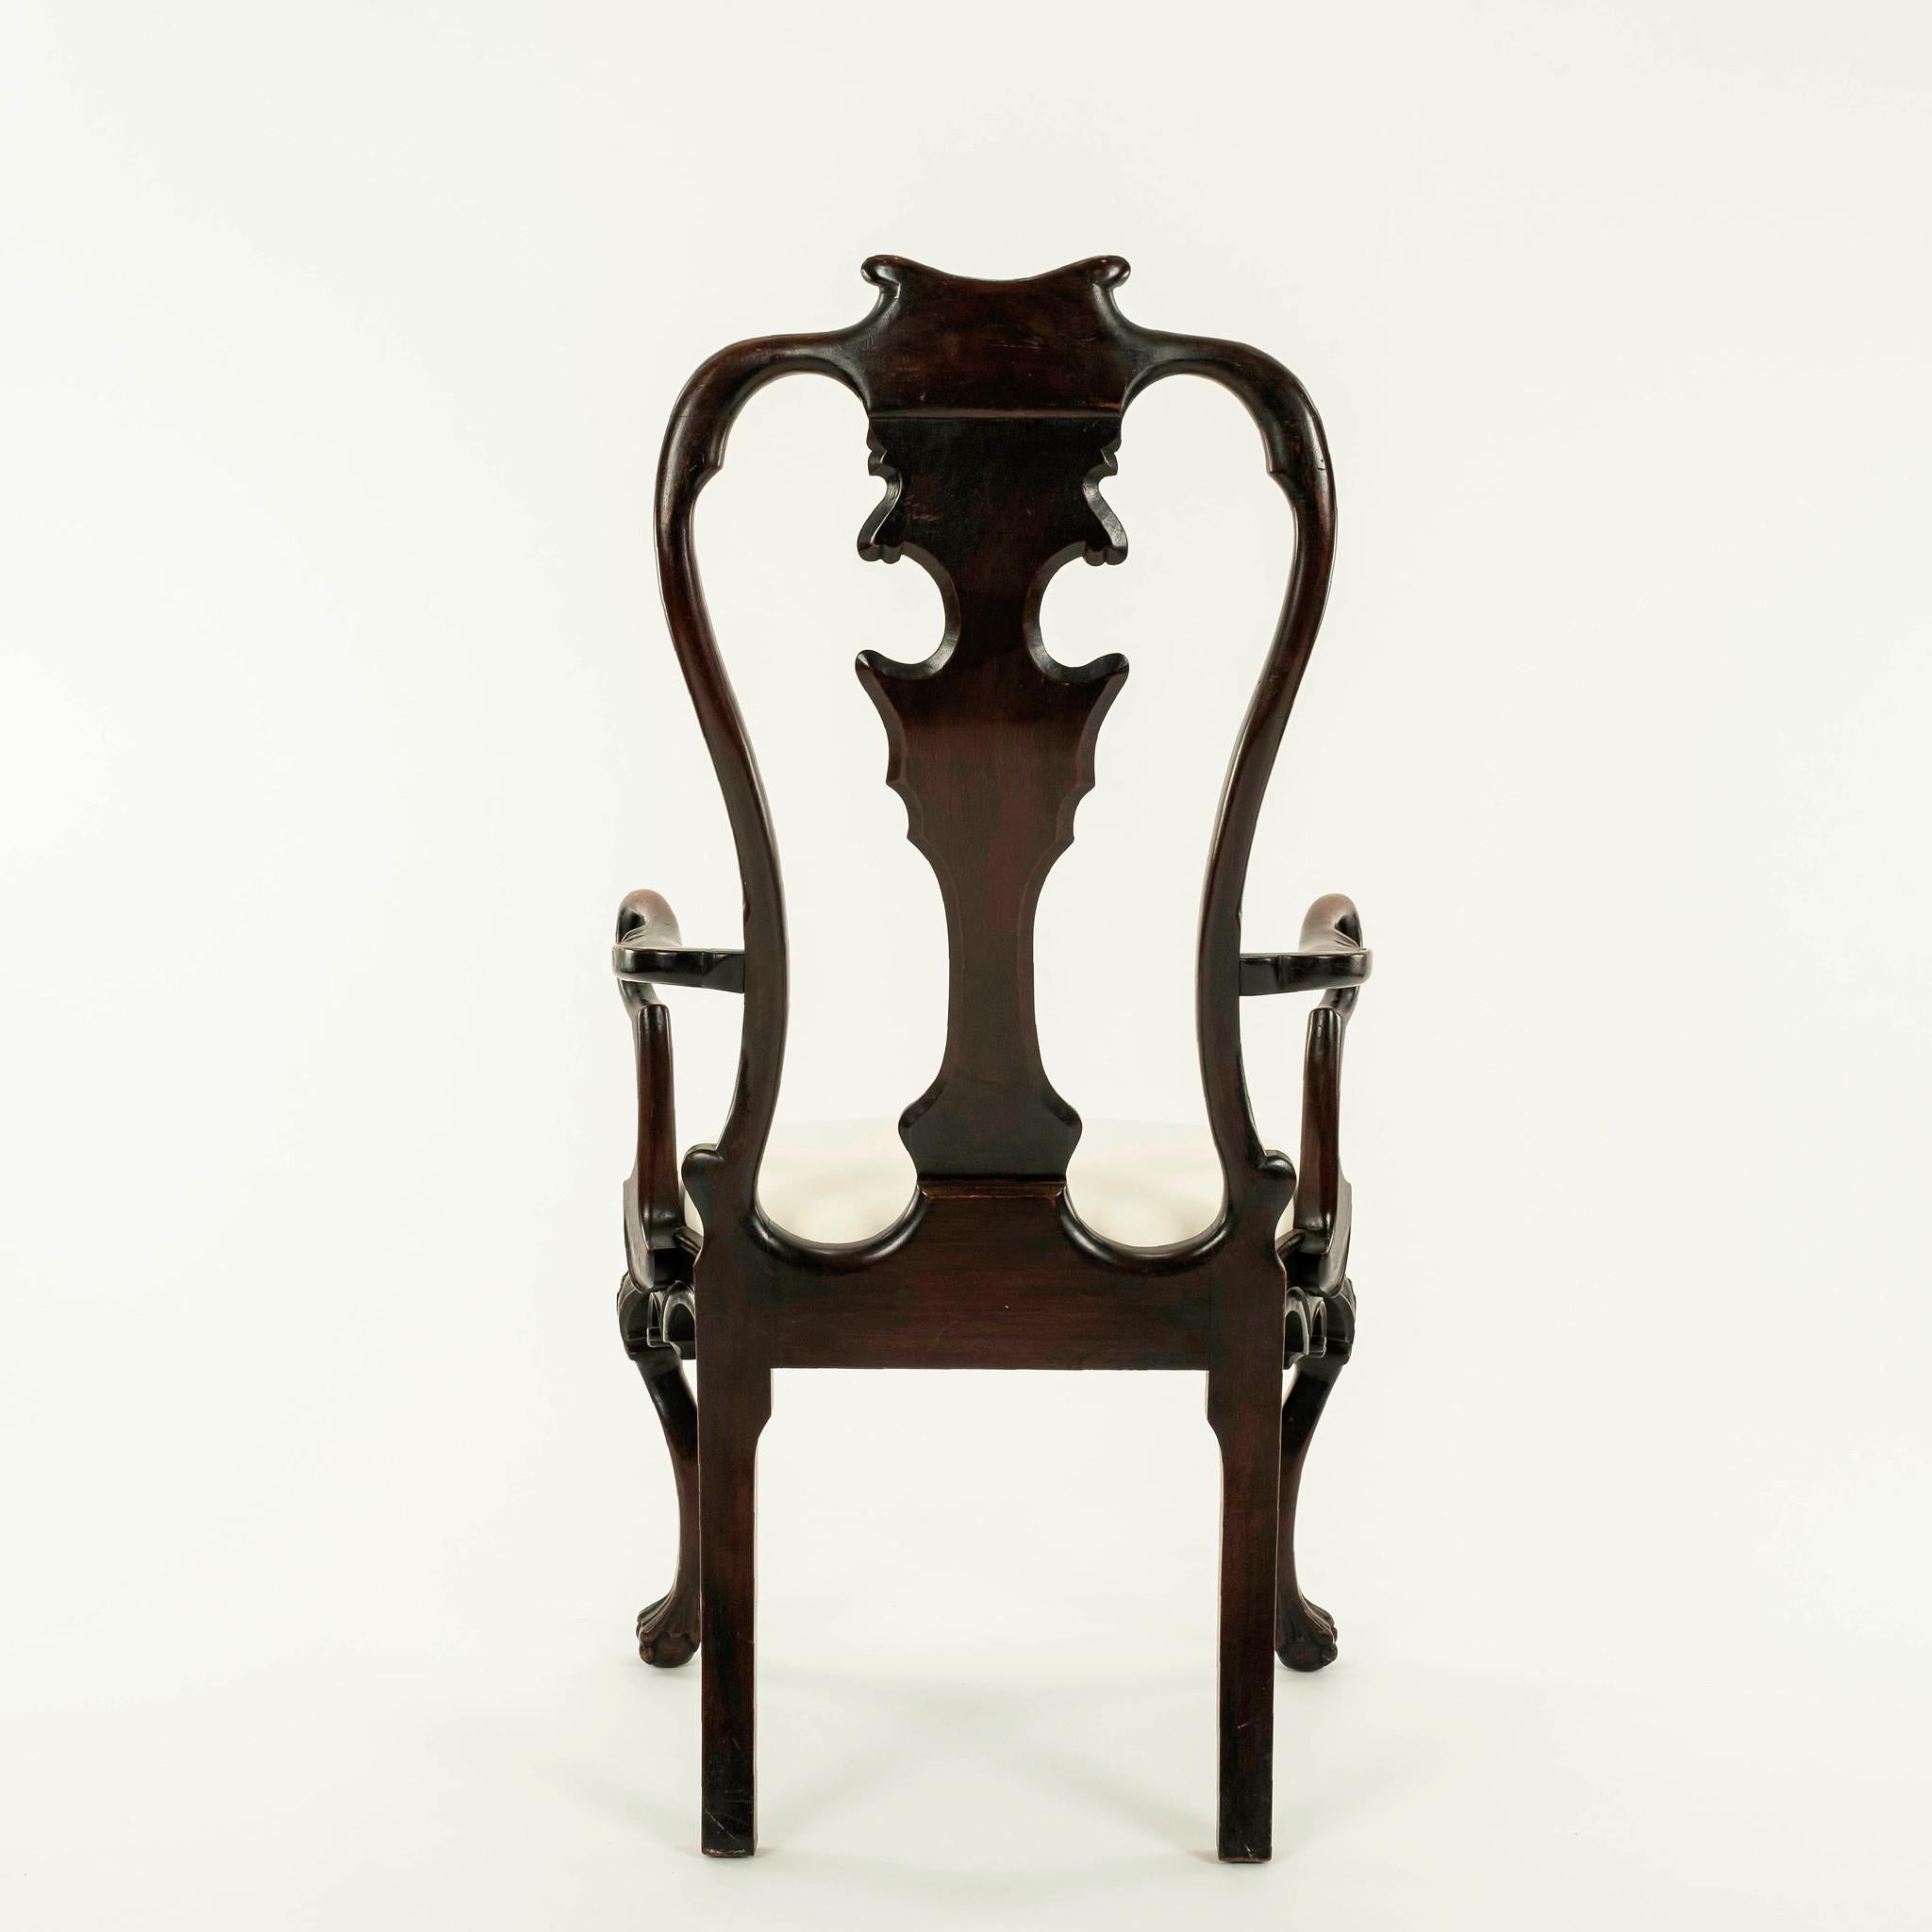 19th century Portuguese Rococo style mahogany arm chair featuring a scrolled crest on a double yolk back centering a shaped flat splat, scalloped seat rail centering a stylized splayed leaf pendant raised on exaggerated cabriole legs with foliate